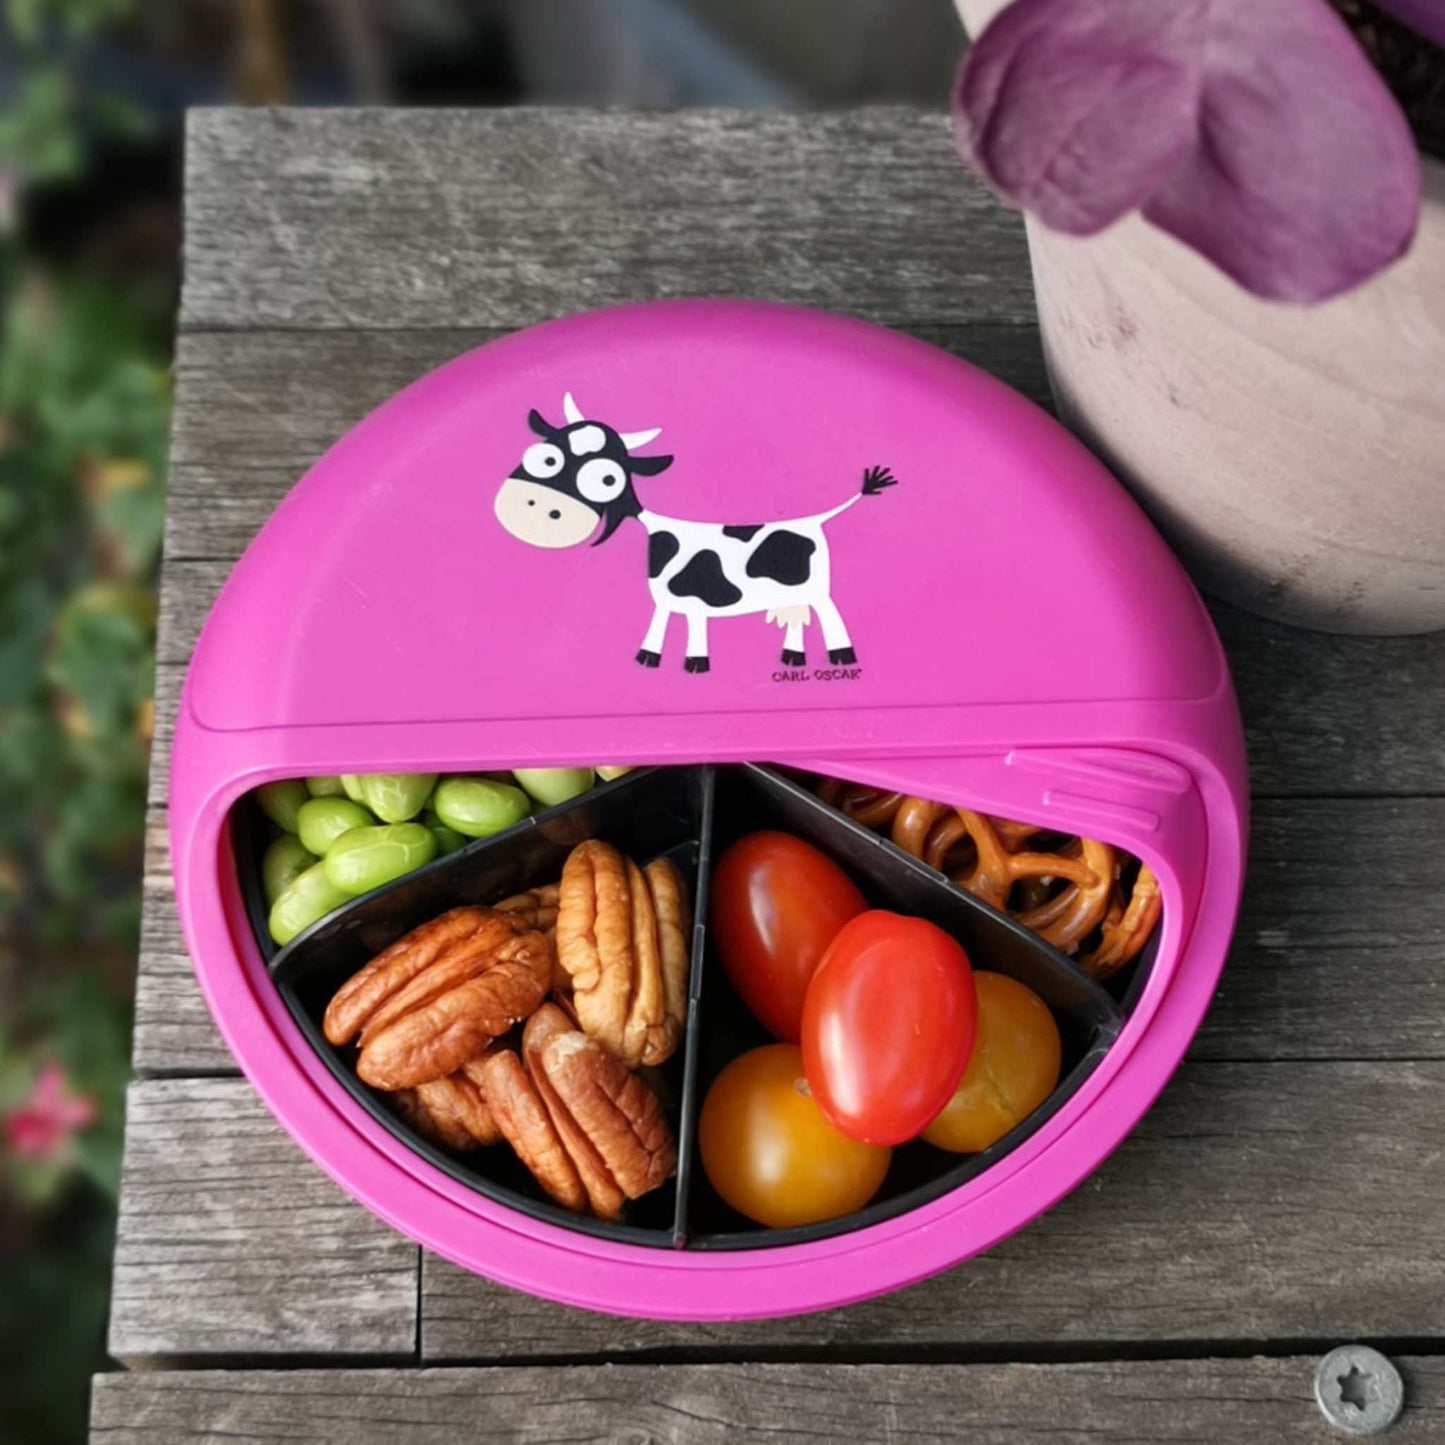 Carl Oscar Lunch Boxes & Totes Pink SnackDISC Children's Lunchbox - Kids Bento Snack Box